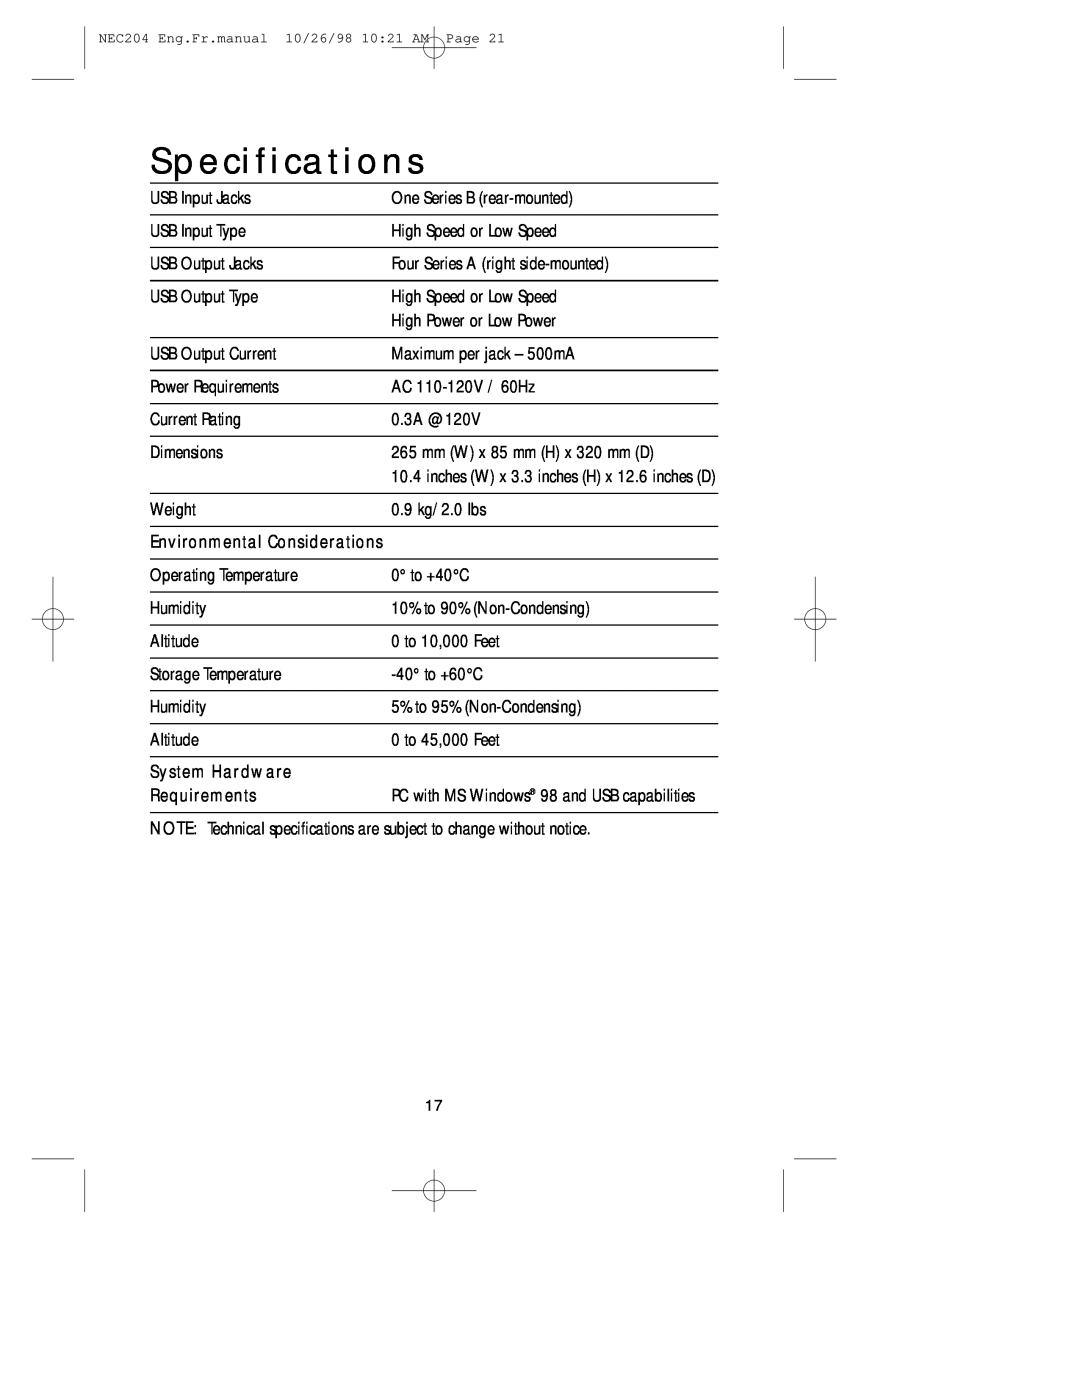 NEC A3844, IB-USB user manual Specifications, System Hardware, Requirements 